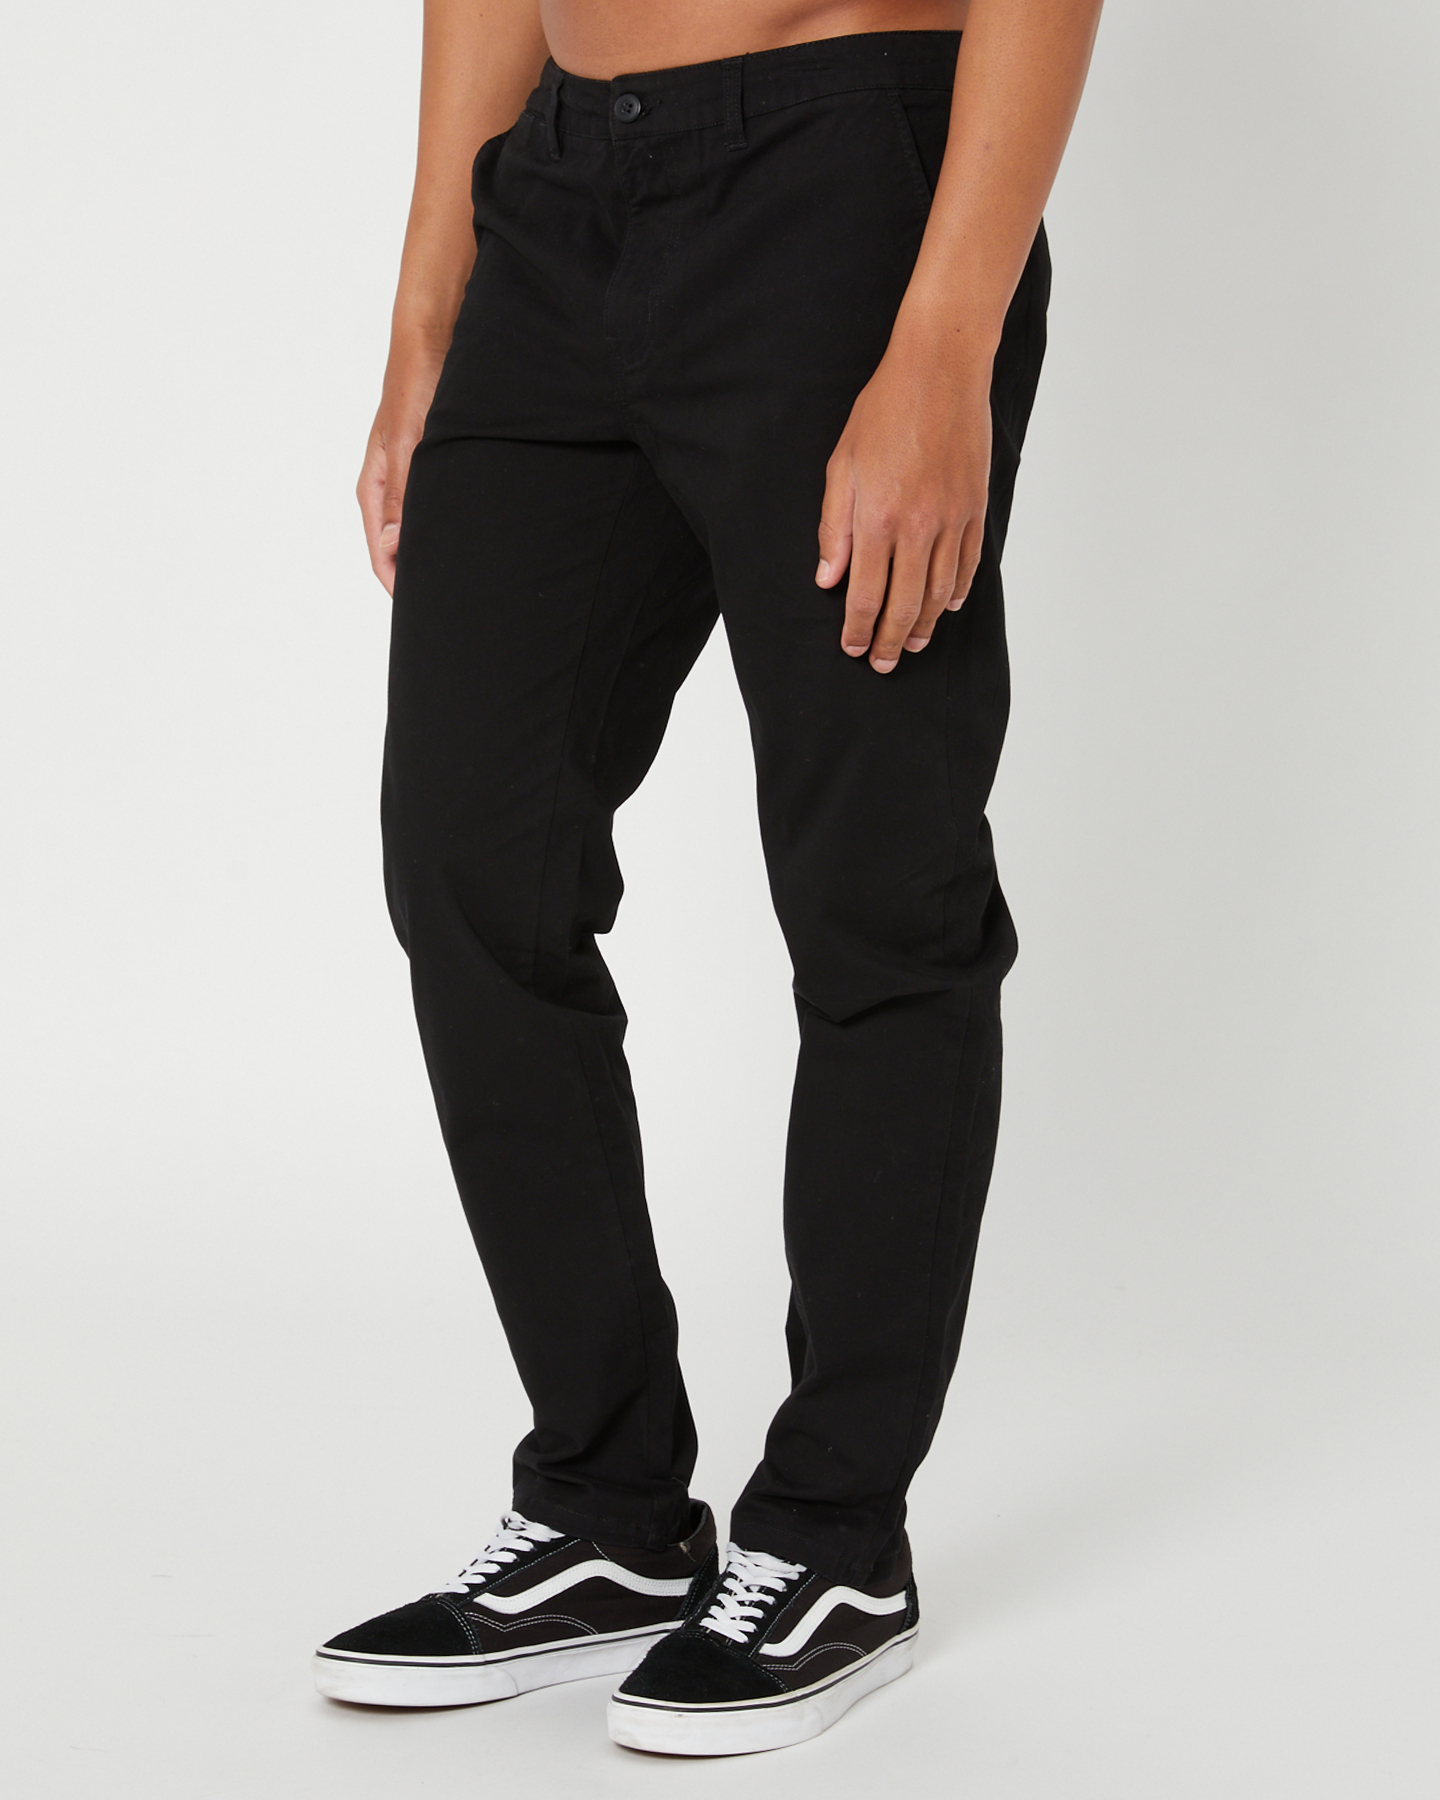 Swell Tempest Chino Pant - Black | SurfStitch